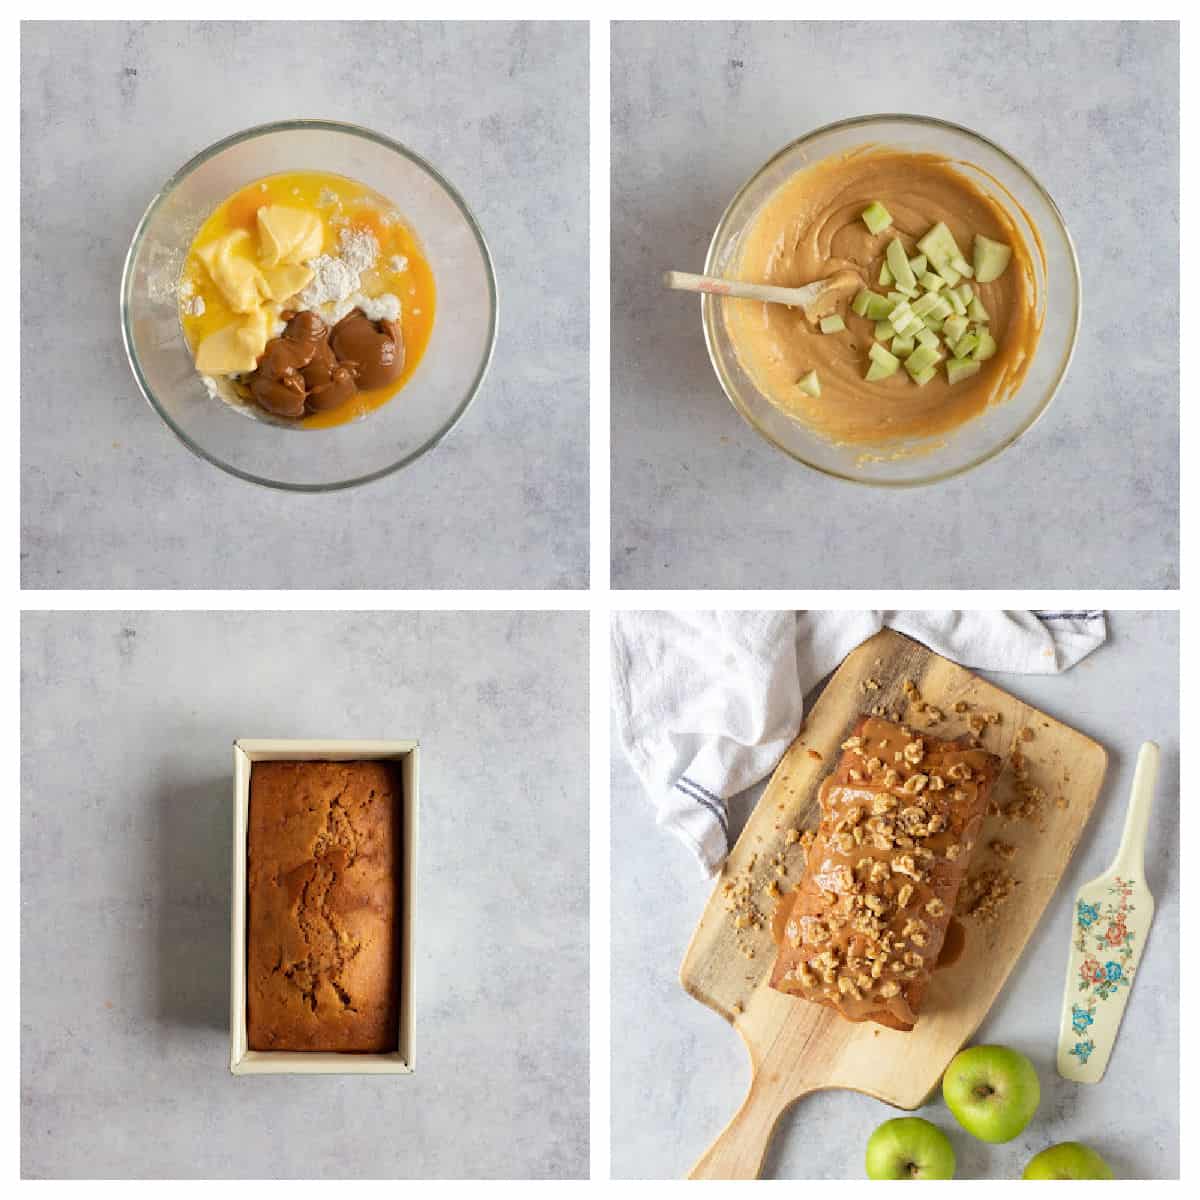 Step by step photo instructions for making apple loaf cake.